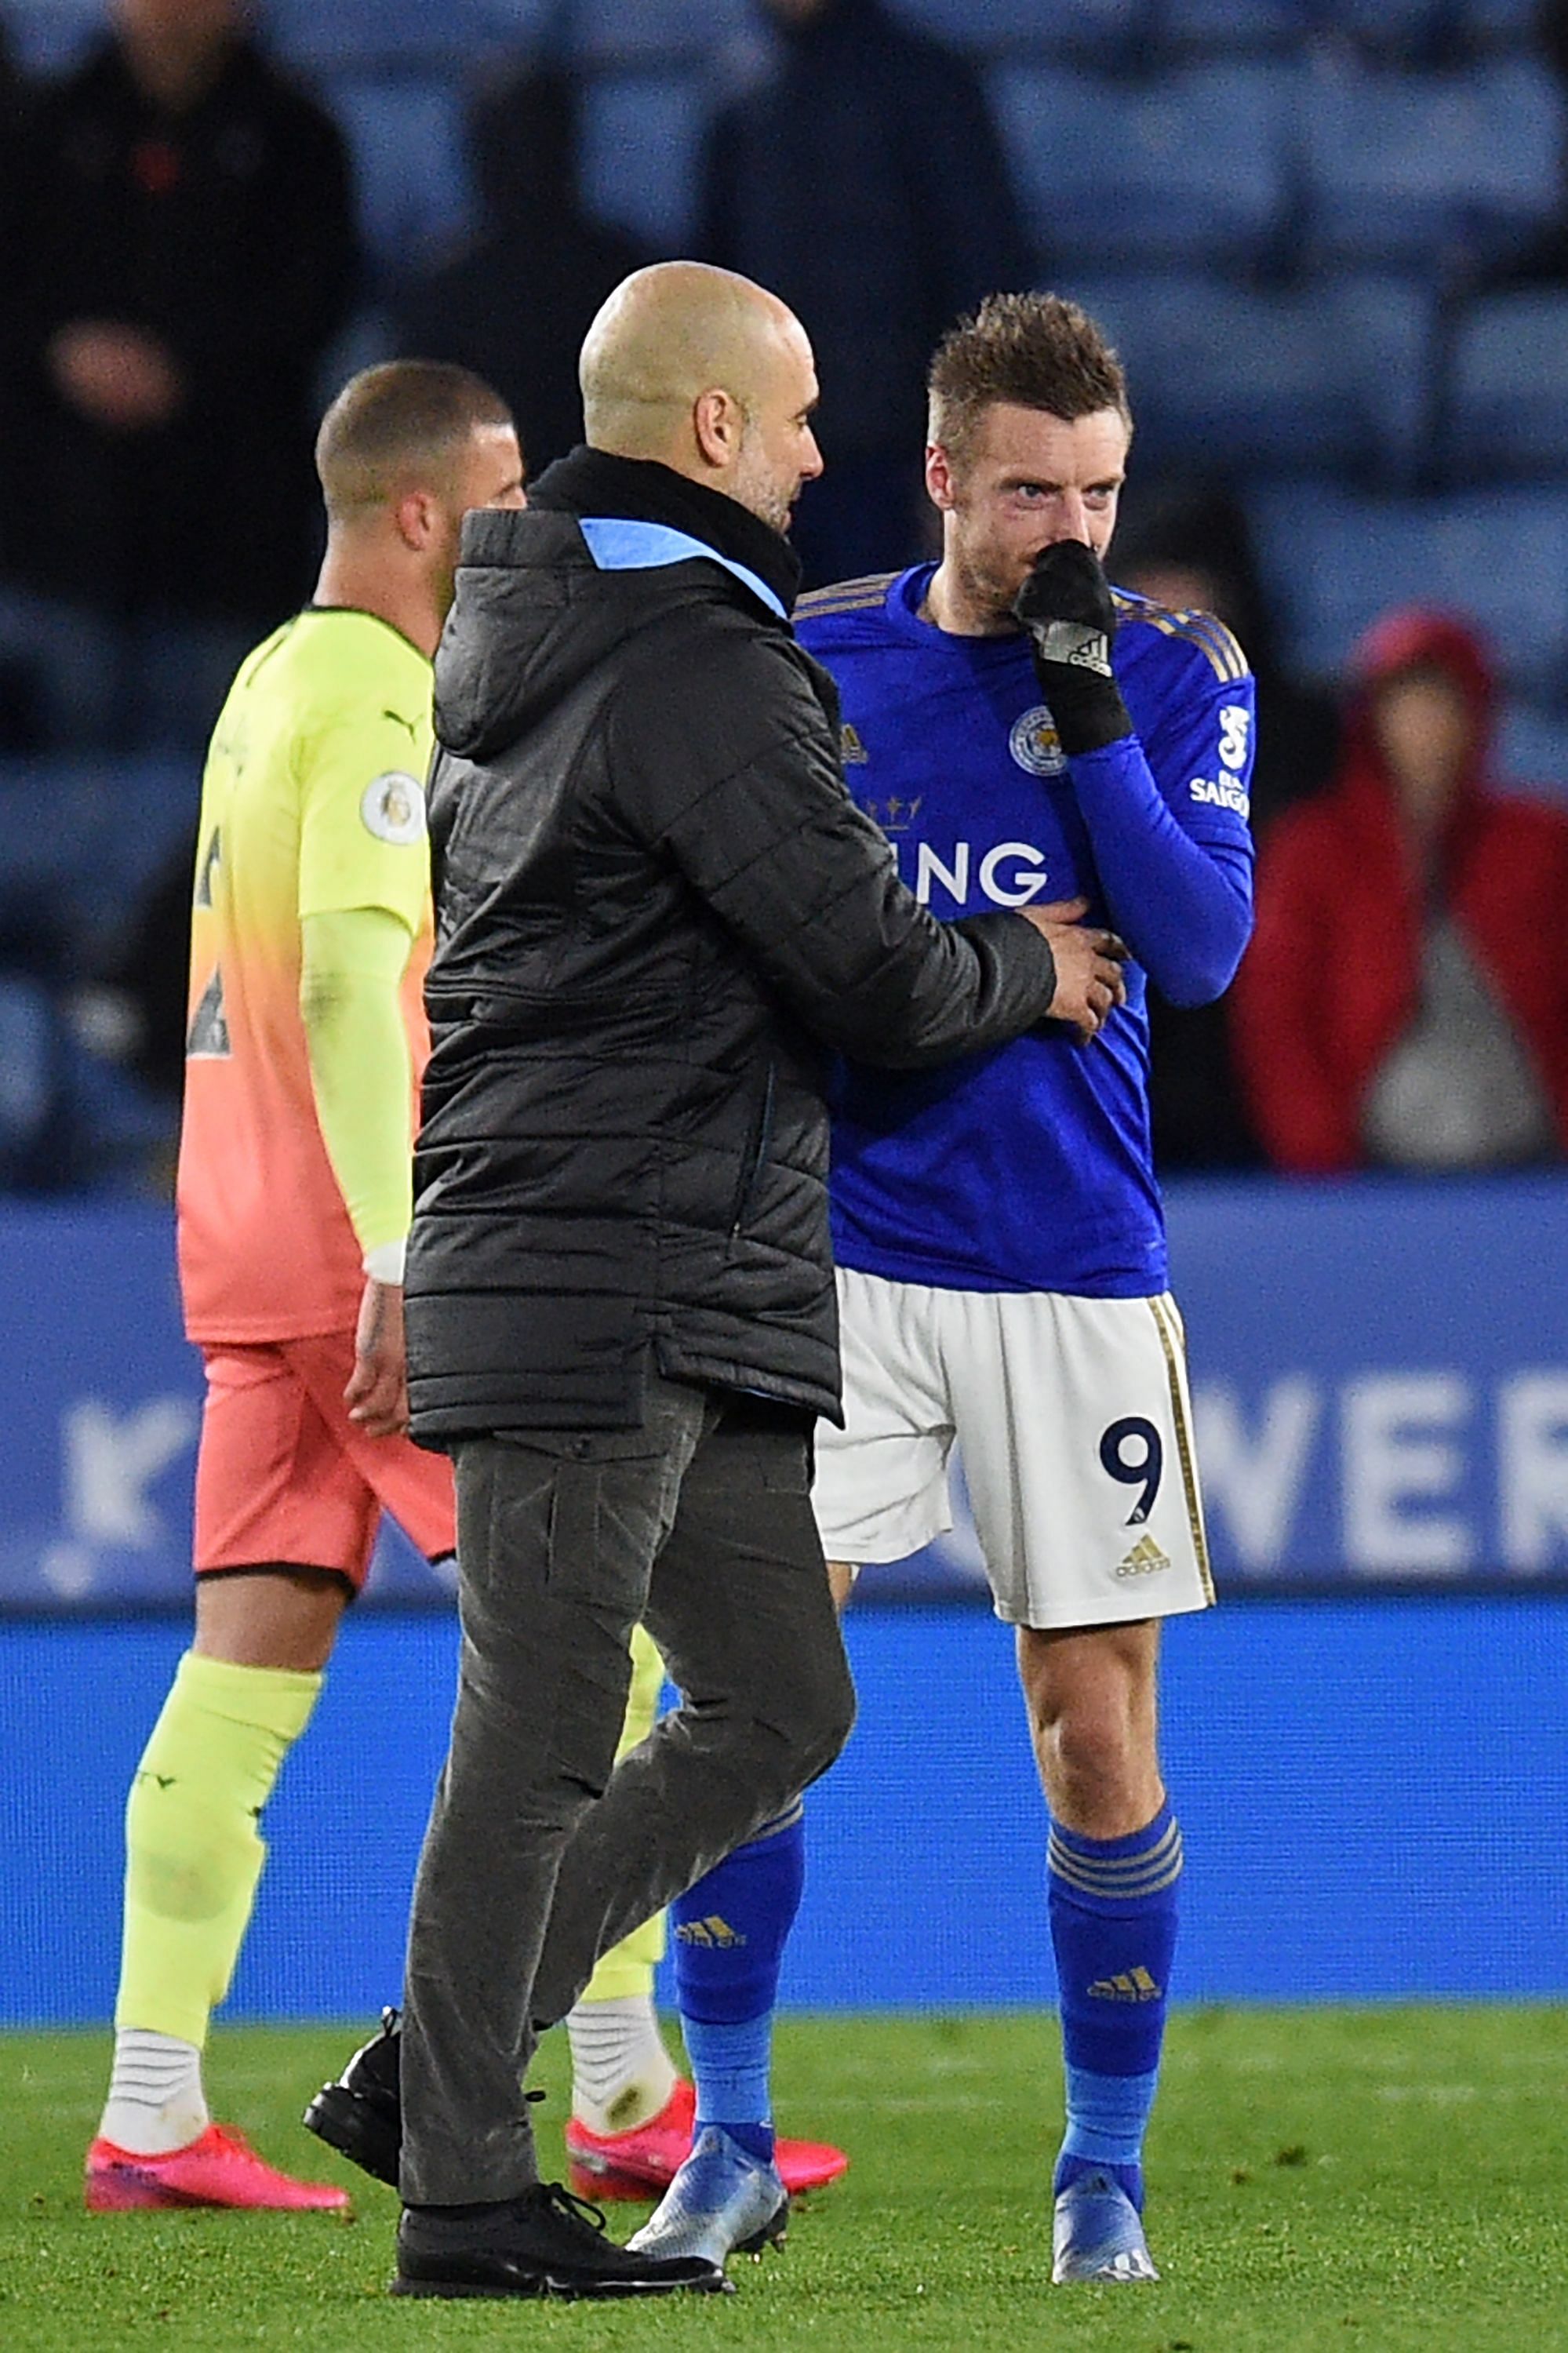 Manchester City's Spanish manager Pep Guardiola (L) consoles Leicester City's English striker Jamie Vardy (R) after the English Premier League football match between Leicester City and Manchester City at King Power Stadium in Leicester. (AFP Photo)